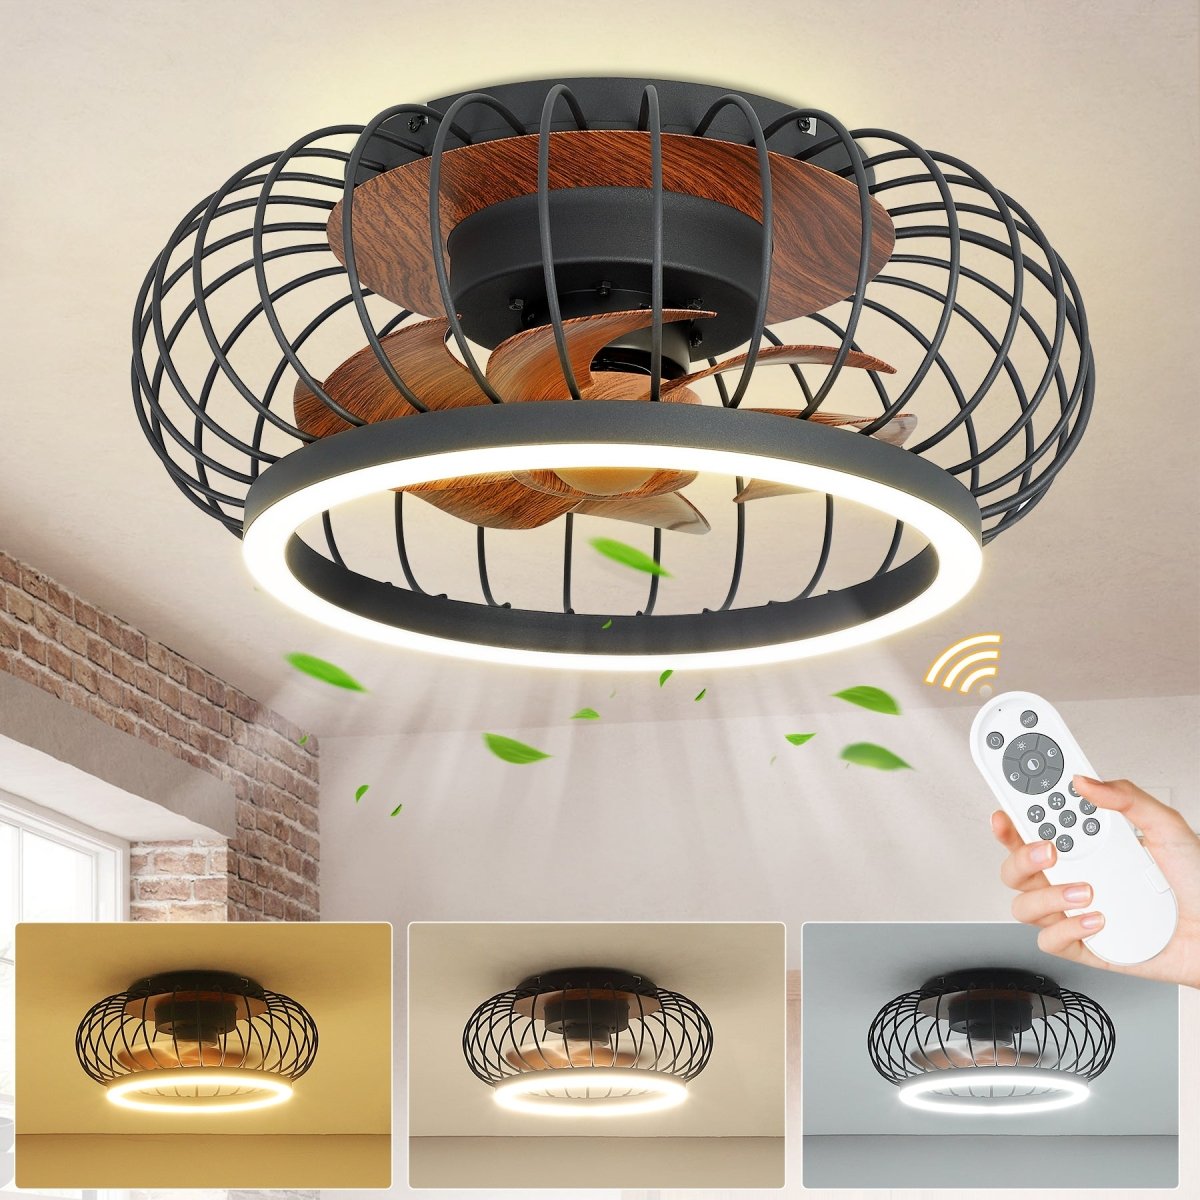 DLLT Cage Ceiling Fan with Lights Remote Control, 17” Small Industrial Bladeless Fan Light with 3 Speed, Smart 18W LED Dimmable Lighting Indoor Low Profile Ceiling Fan Flush Mount, 3 Color Changeable - WS-FPZ30-18C 1 | DEPULEY